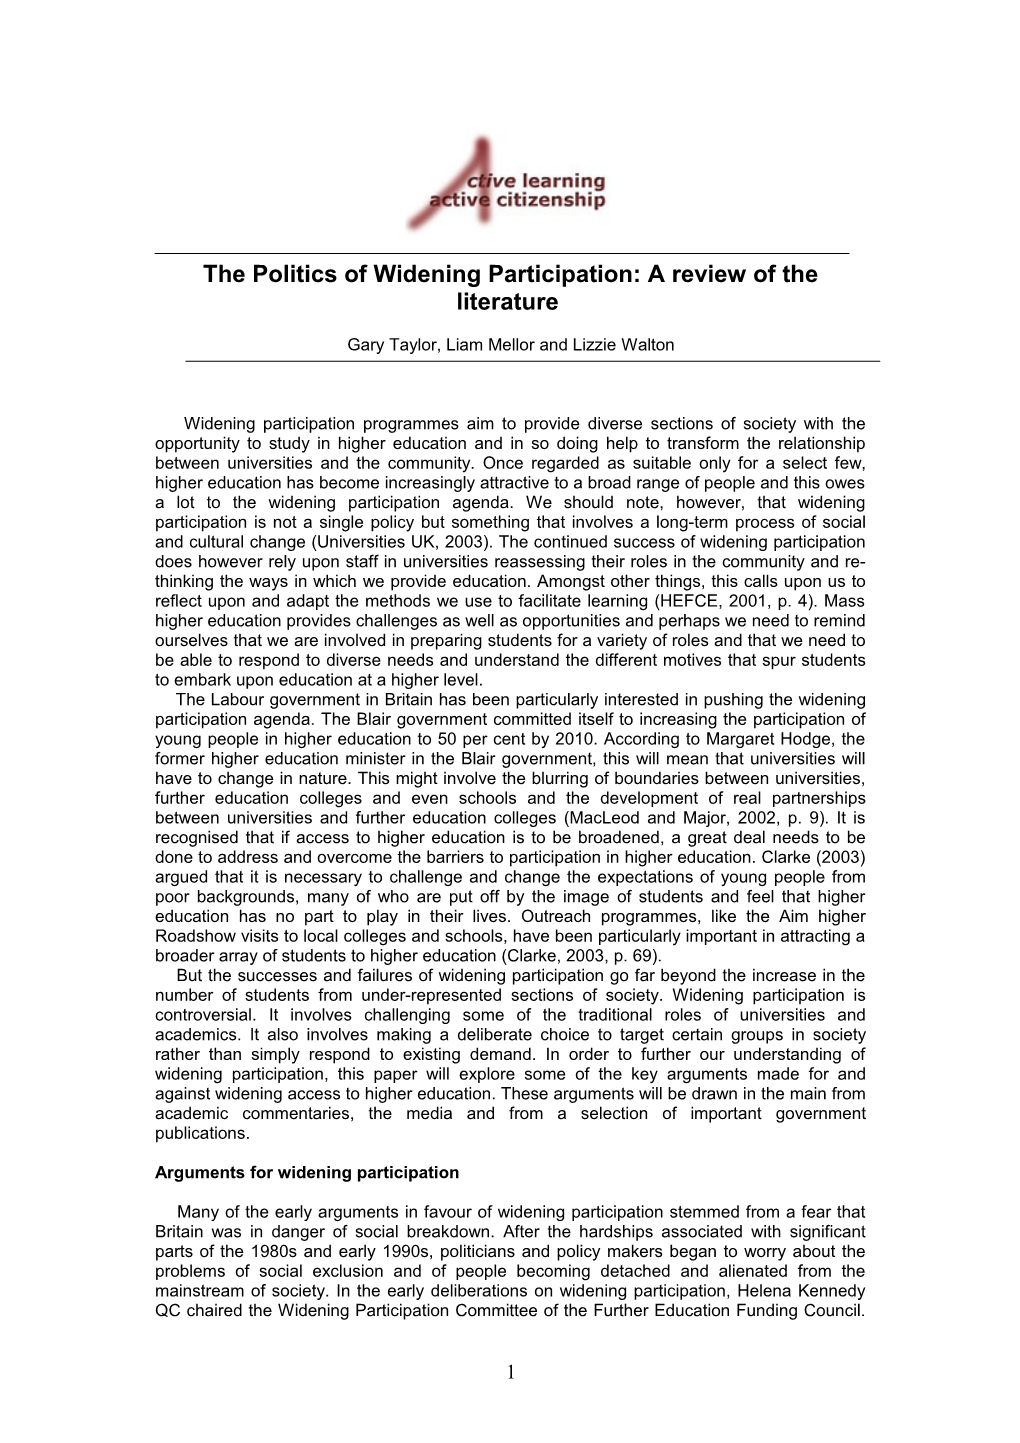 The Politics of Widening Participation